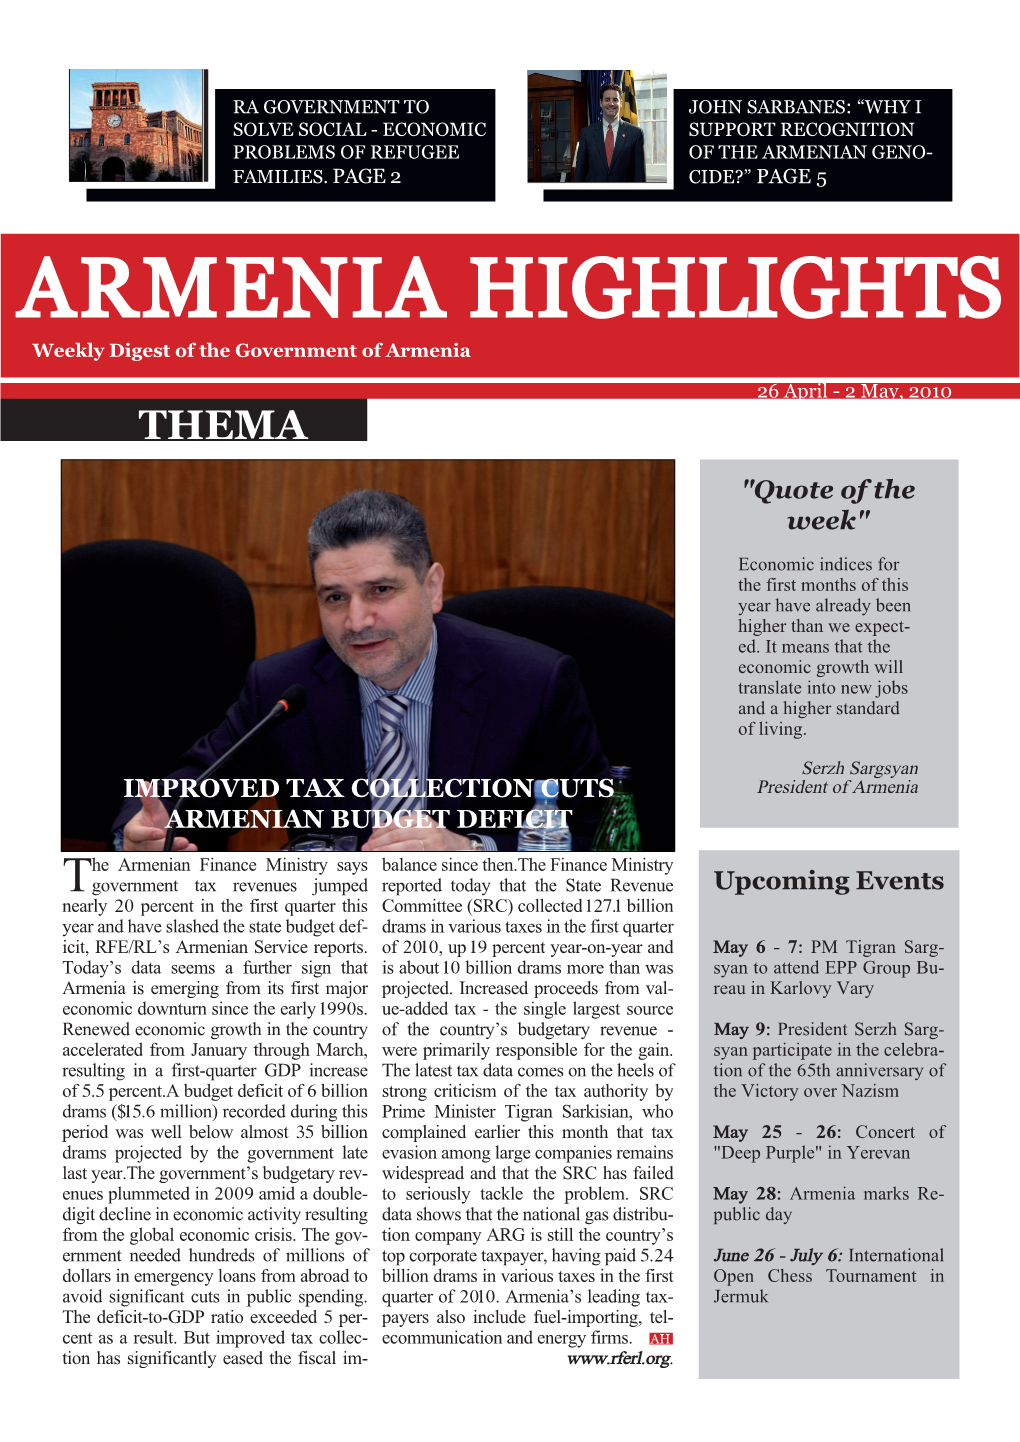 ARMENIA HIGHLIGHTS Weekly Digest of the Government of Armenia